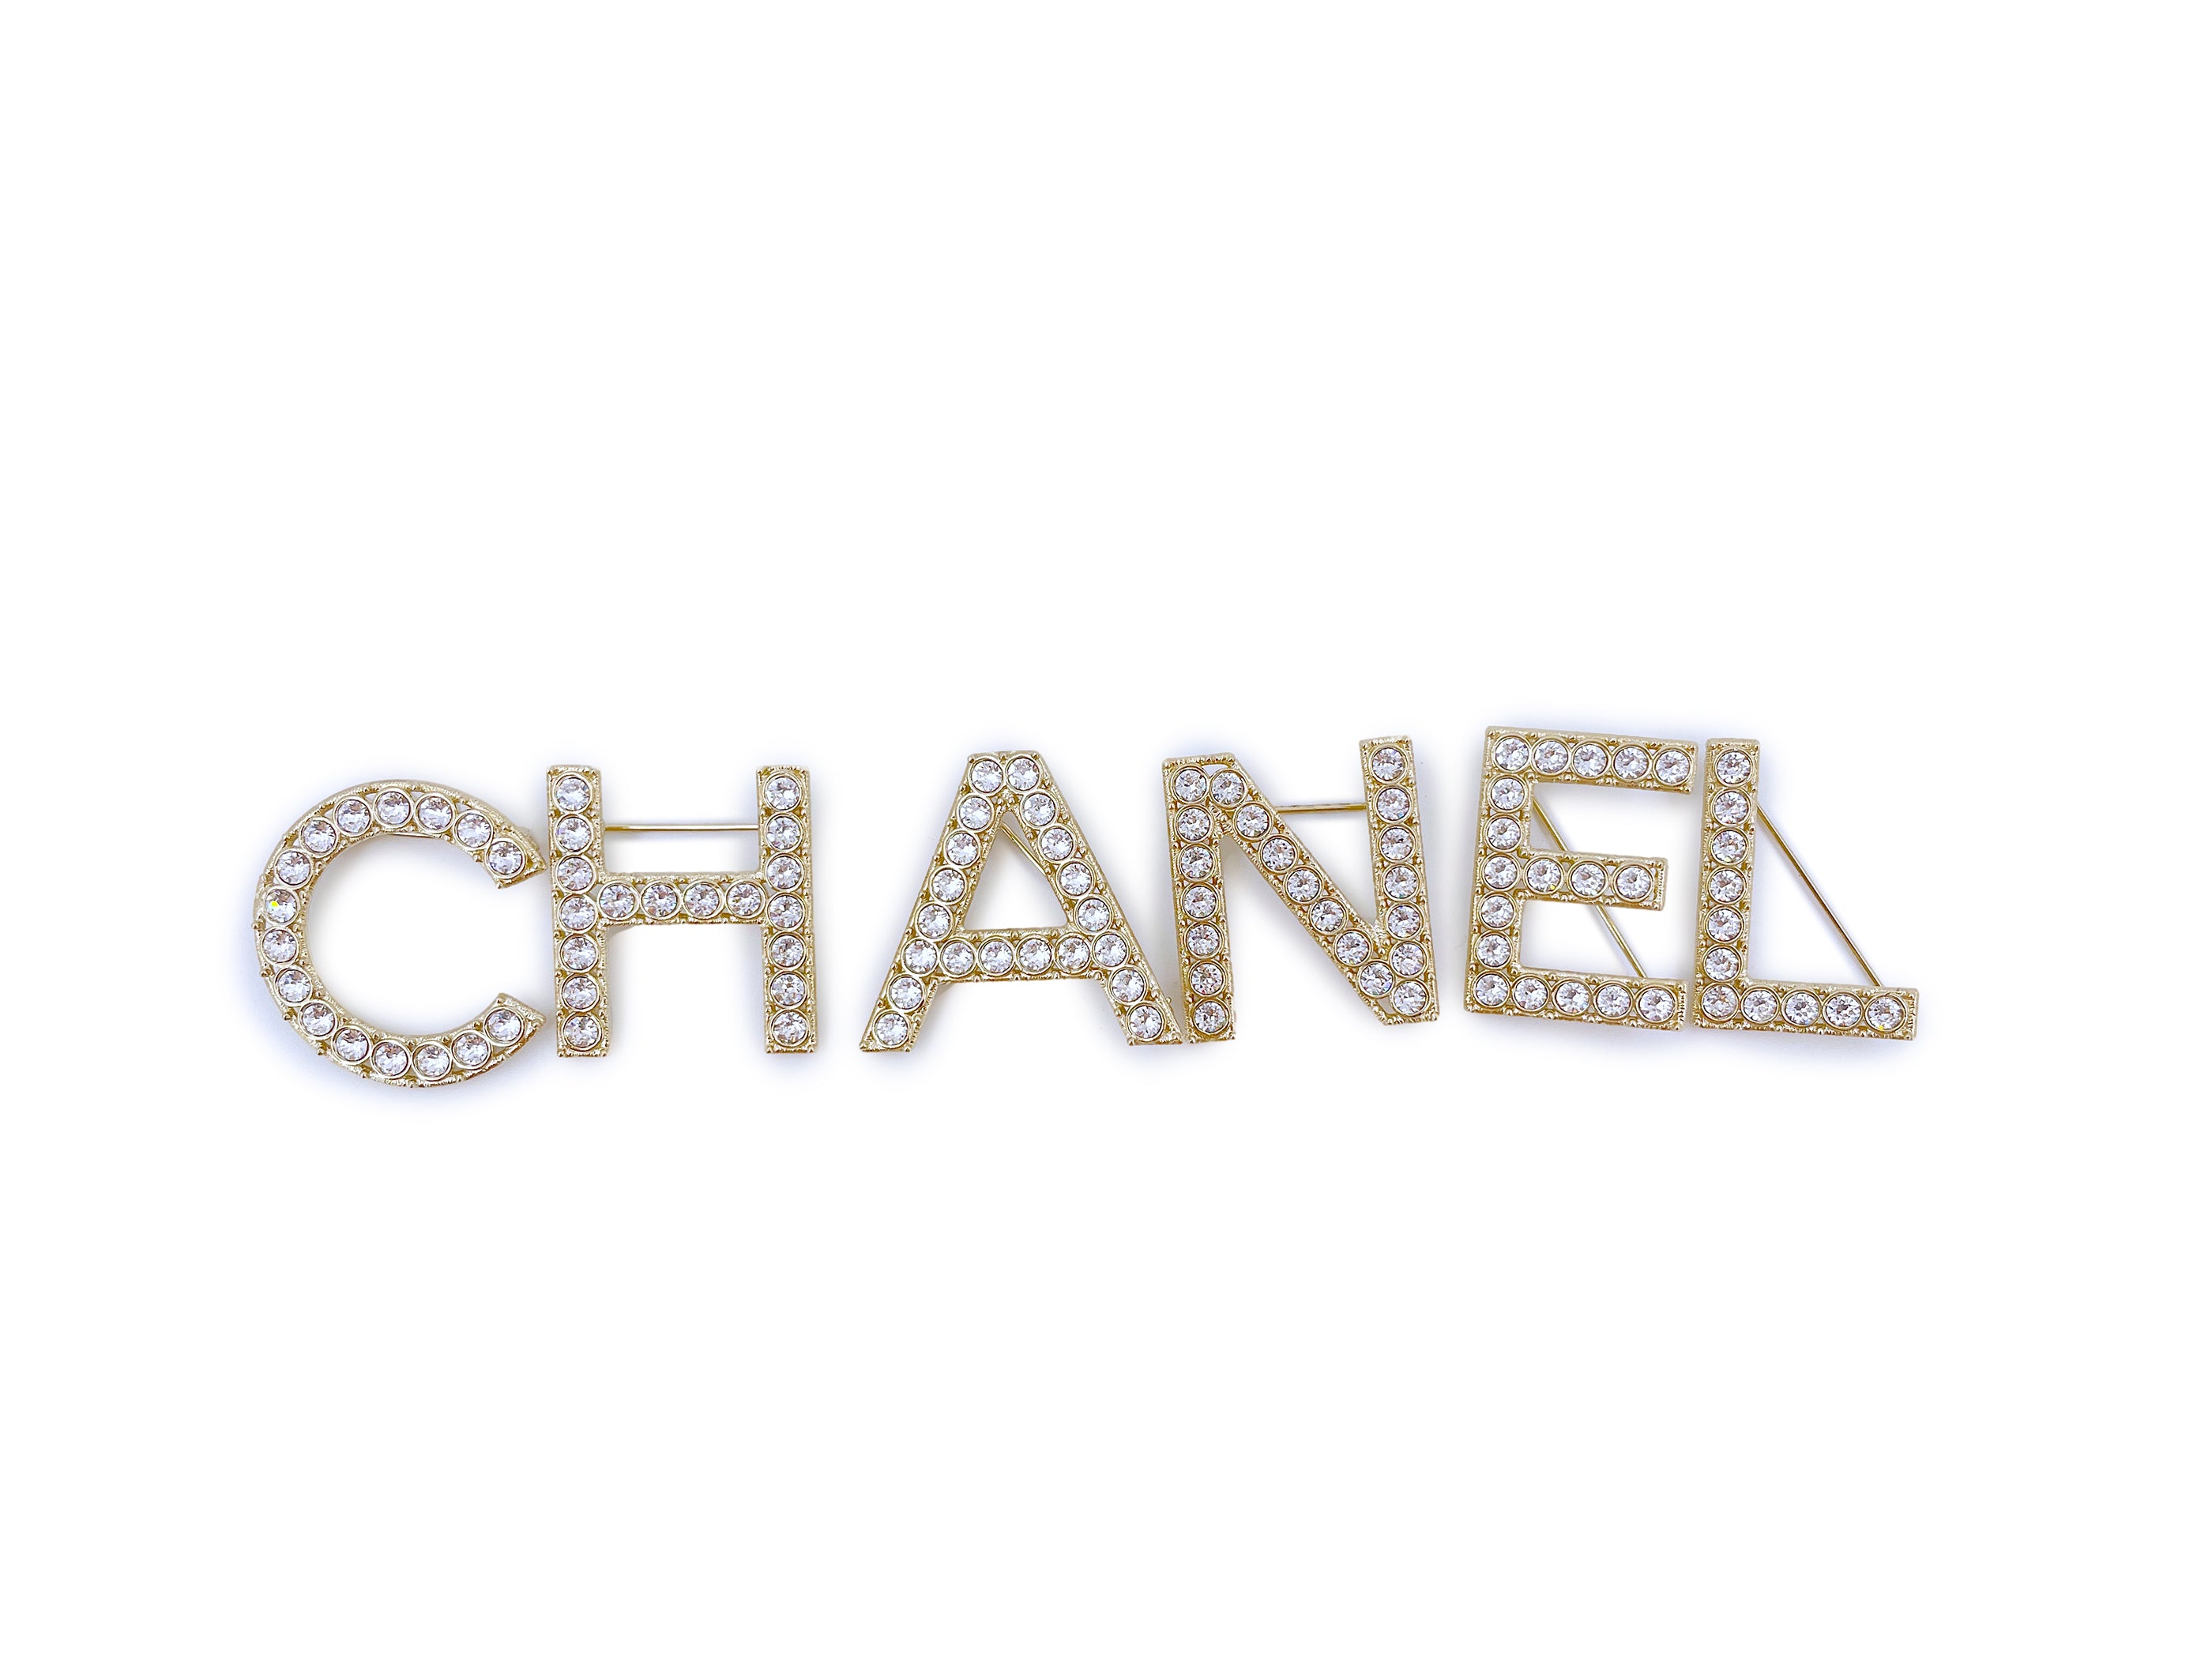 A Chanel Brooch Inspired by the Brand's Classic Tweed - The New York Times